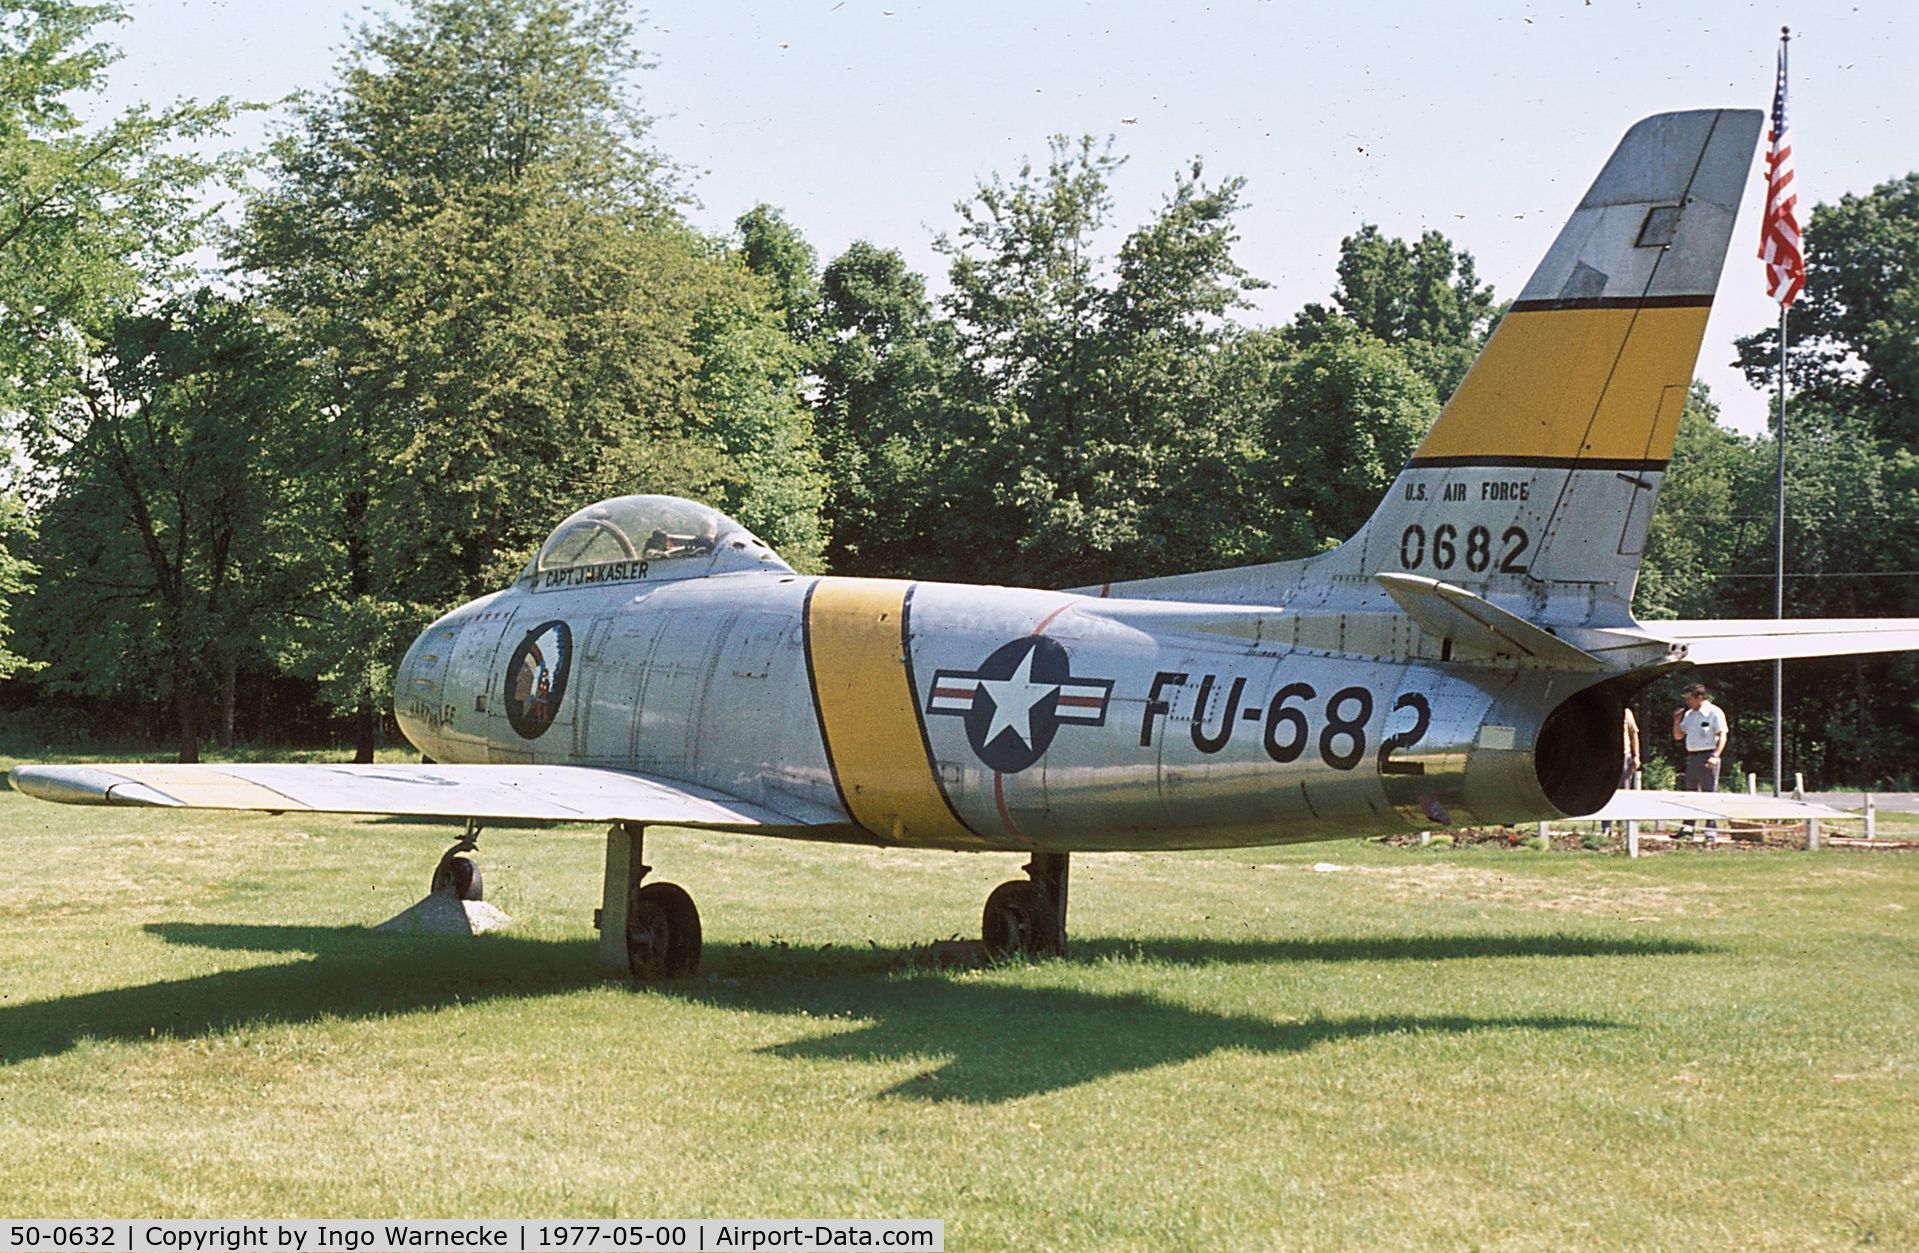 50-0632, North American F-86-E-1-NA C/N unknown_50-0632, North American F-86E-1-NA Sabre, displayed as FU-682 at the Indianapolis VFW post